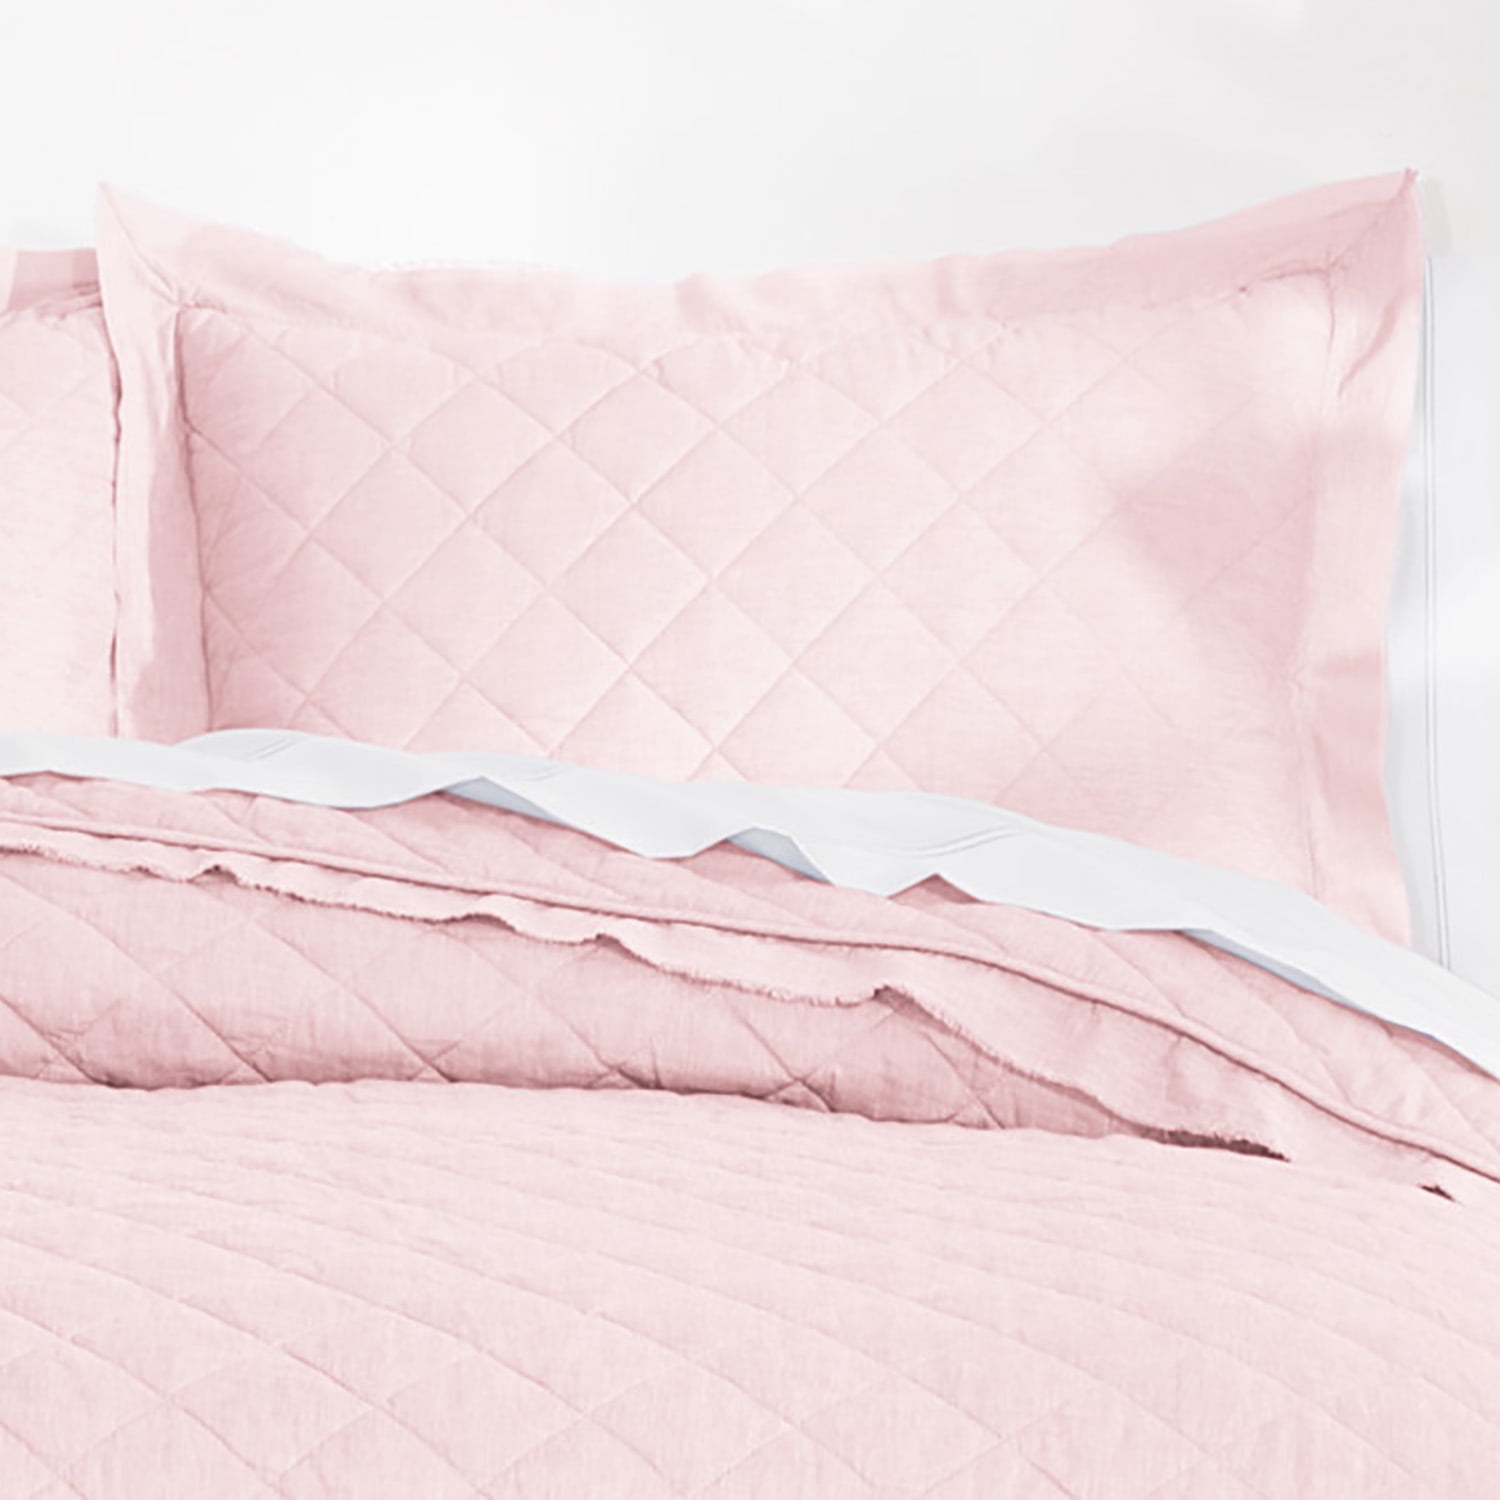 Details about   Pottery Barn Washed Cotton Quilted Standard Sham Rose PINK 